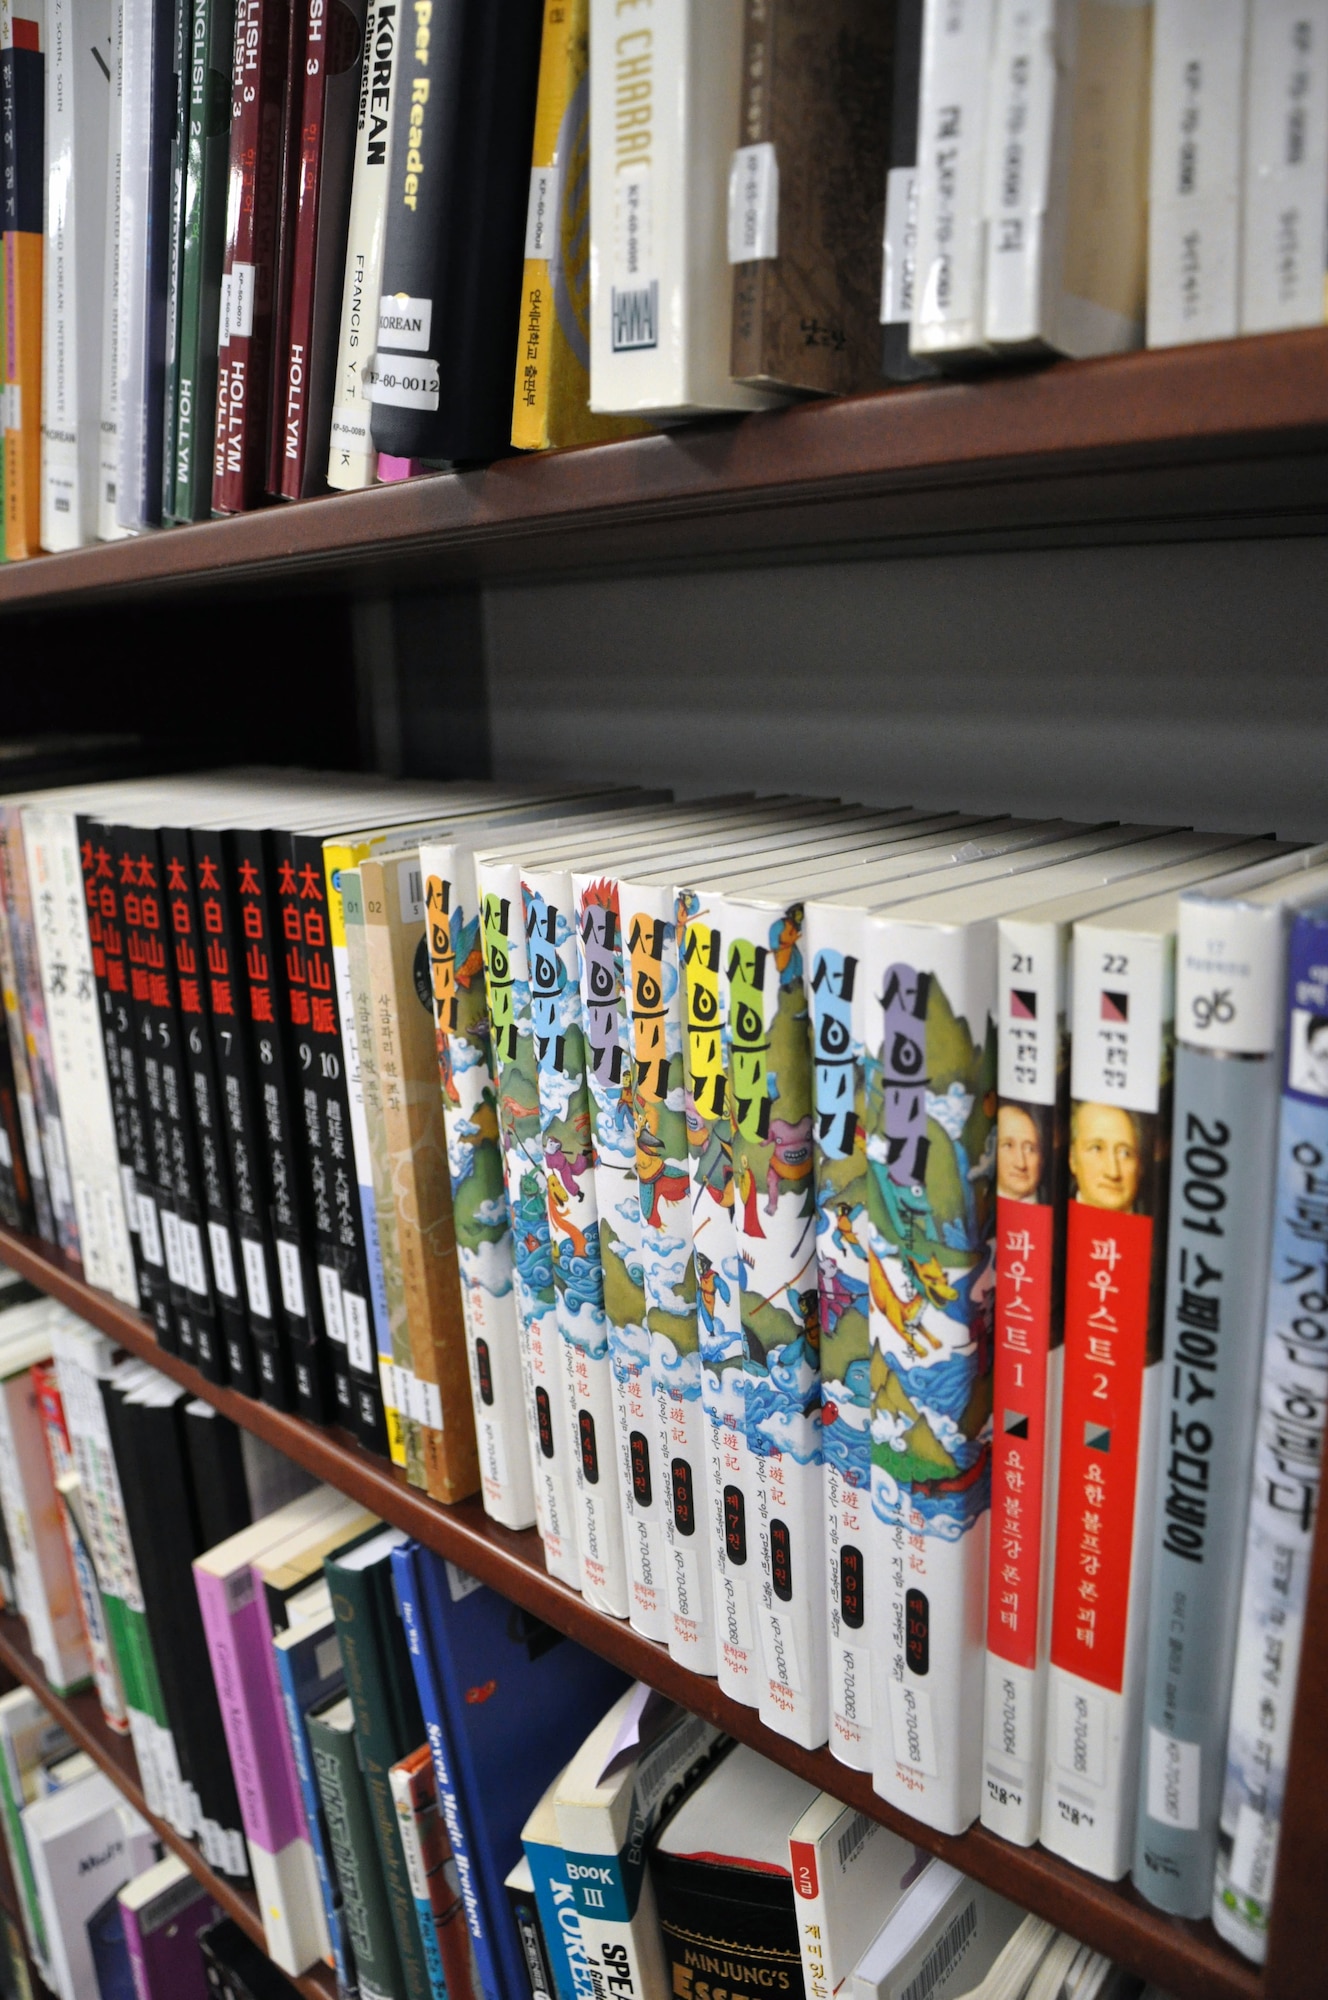 Books in various languages fill the shelves of the Offutt Language Learning Center’s library Sept 23. Among the languages that Air Force linguists learn are Spanish, Korean, Chinese, Persian Farsi, Russian, Pashto, Arabic, Hebrew and Dari. (U.S. Air Force photo by Staff Sgt. Rachelle Blake)